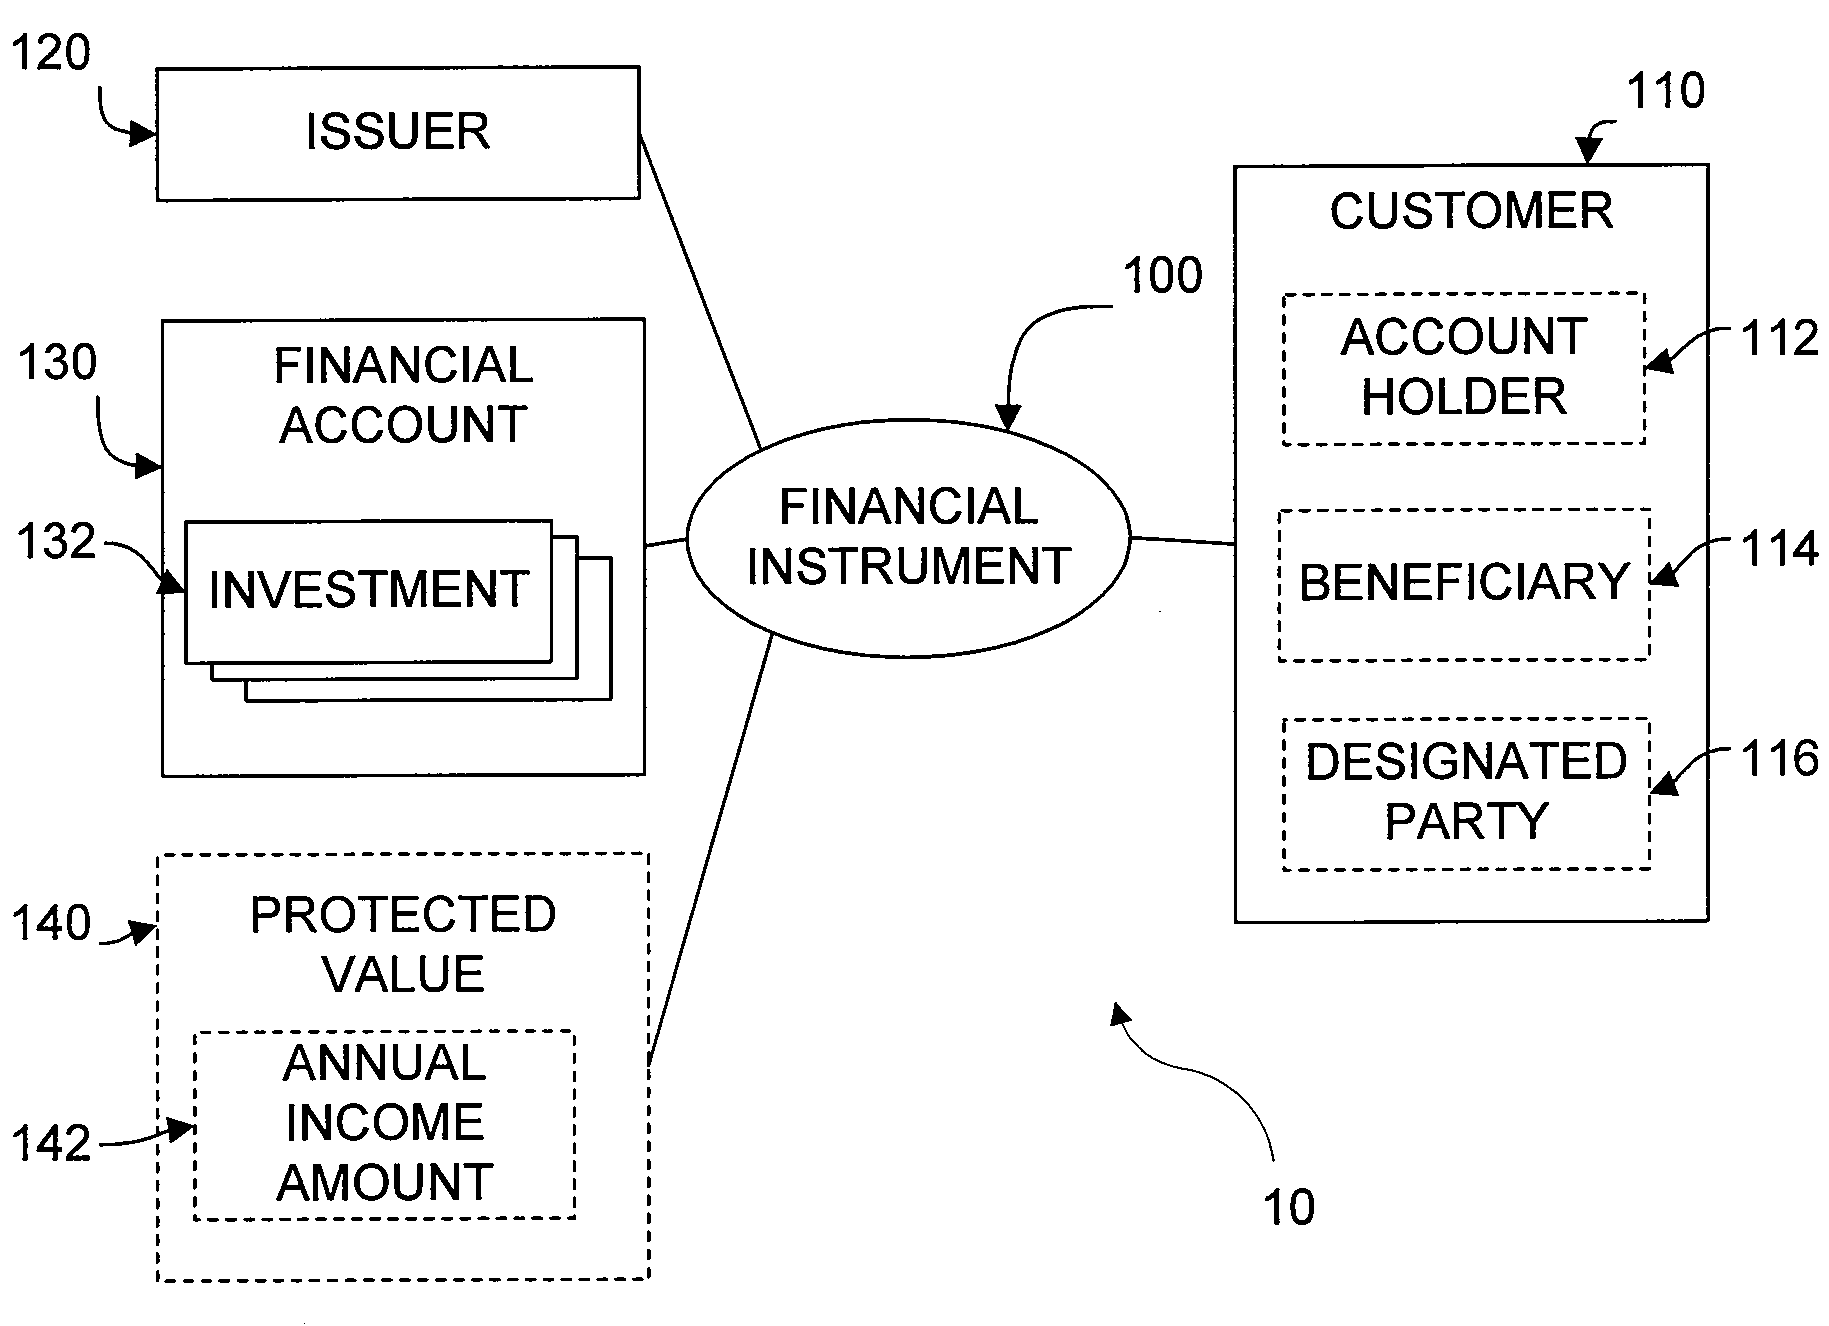 Financial Instrument Utilizing a Customer Specific Date